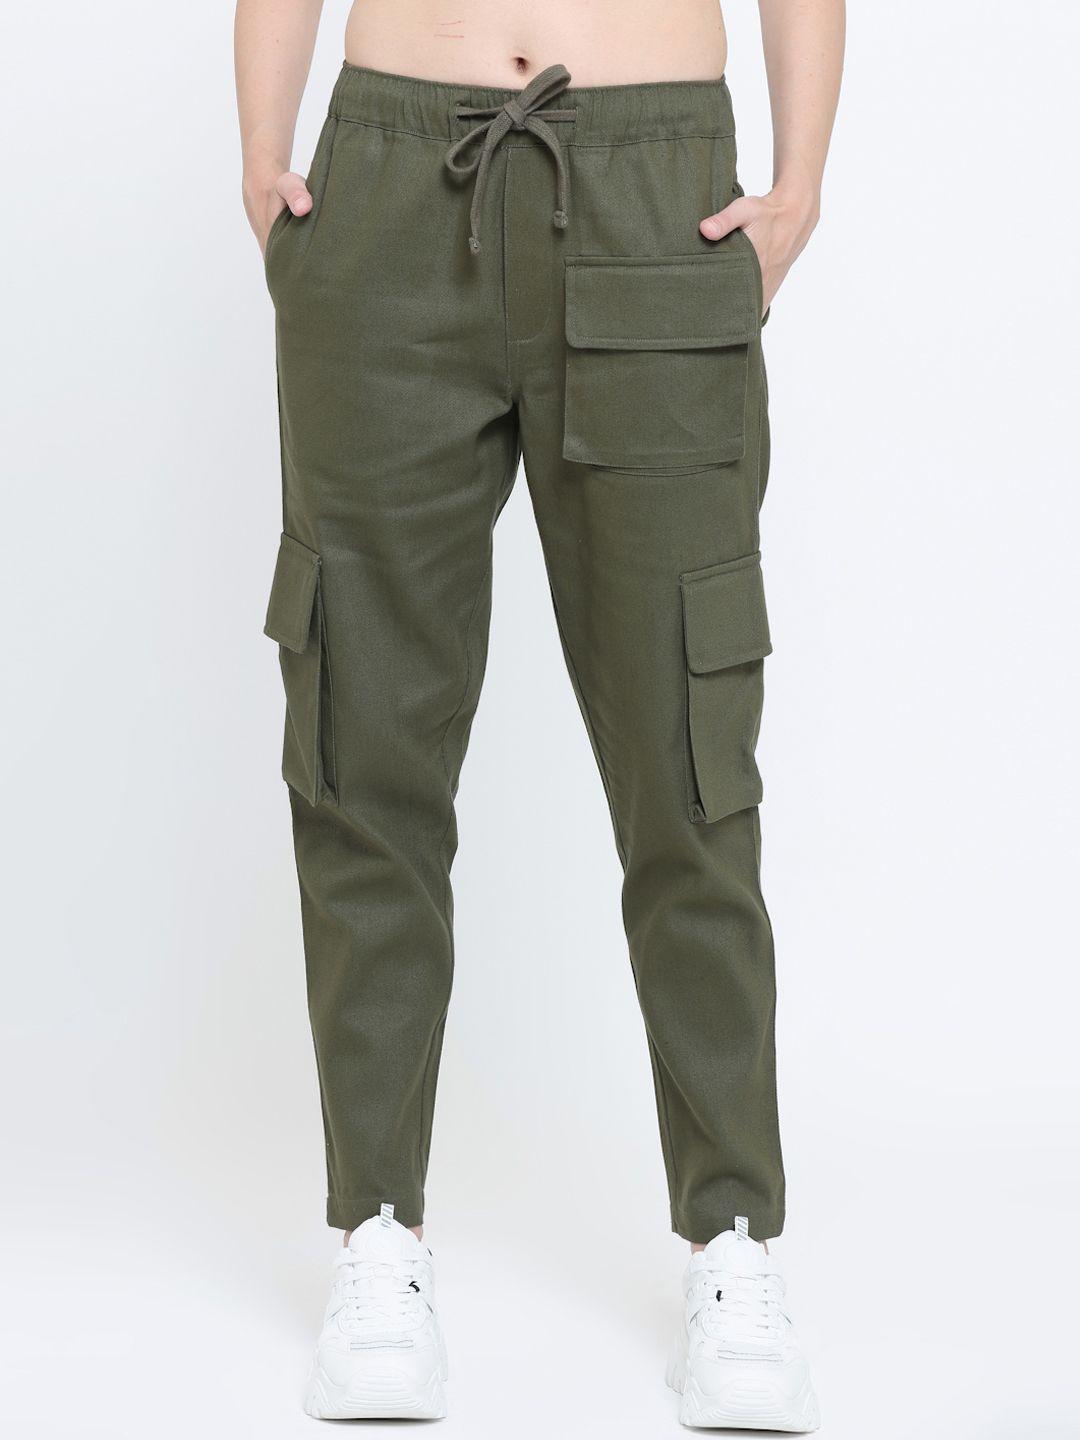 everdion women olive green solid relaxed straight leg cargos trousers